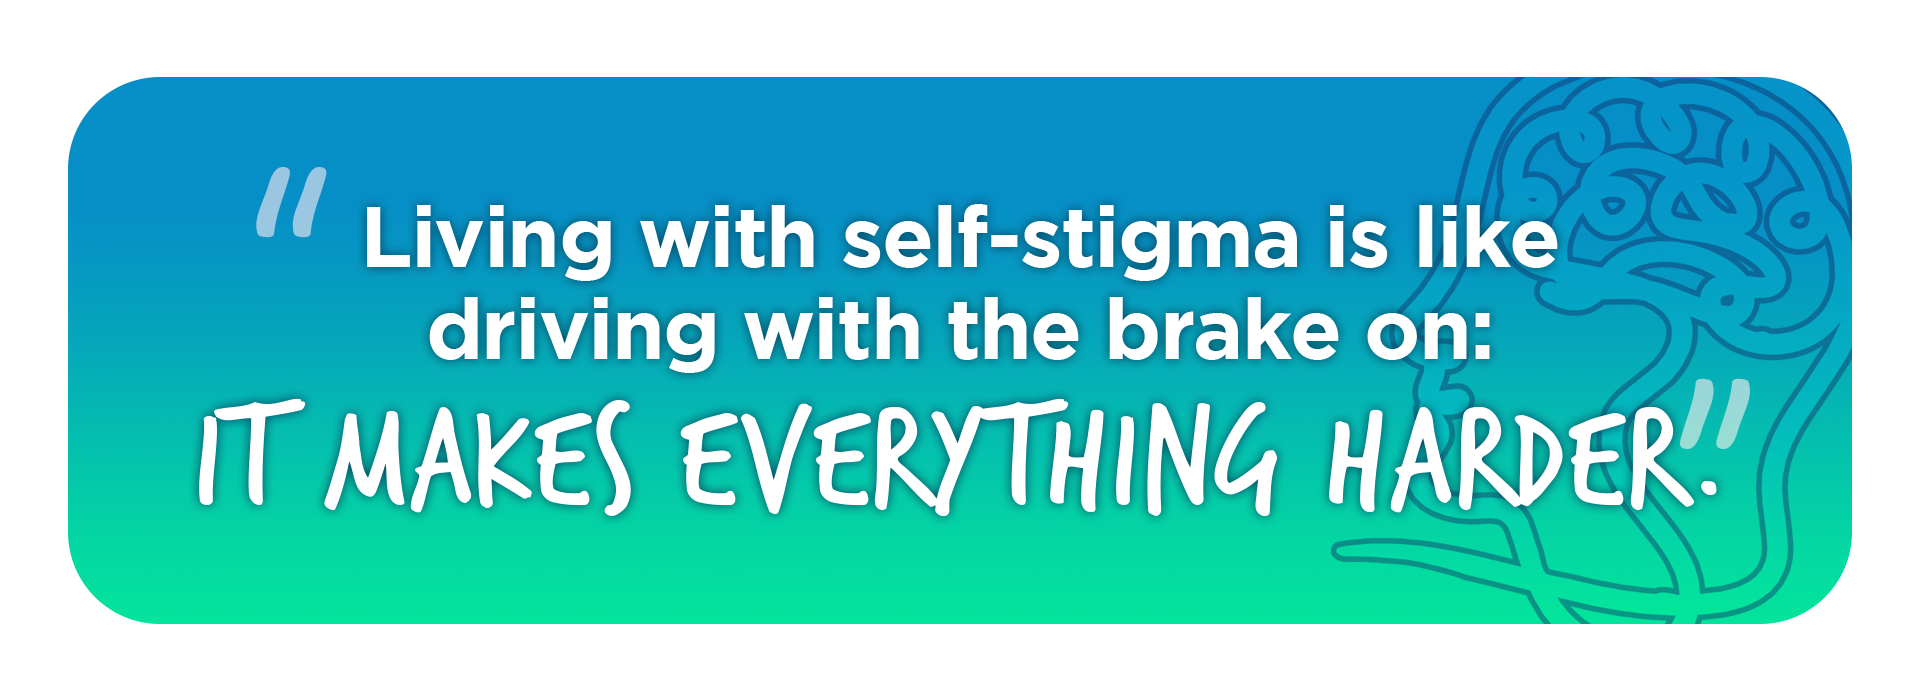 A green and blue background with the foreground having a quote that reads "Living with self-stigma is like driving with the brake on: it makes everything harder."